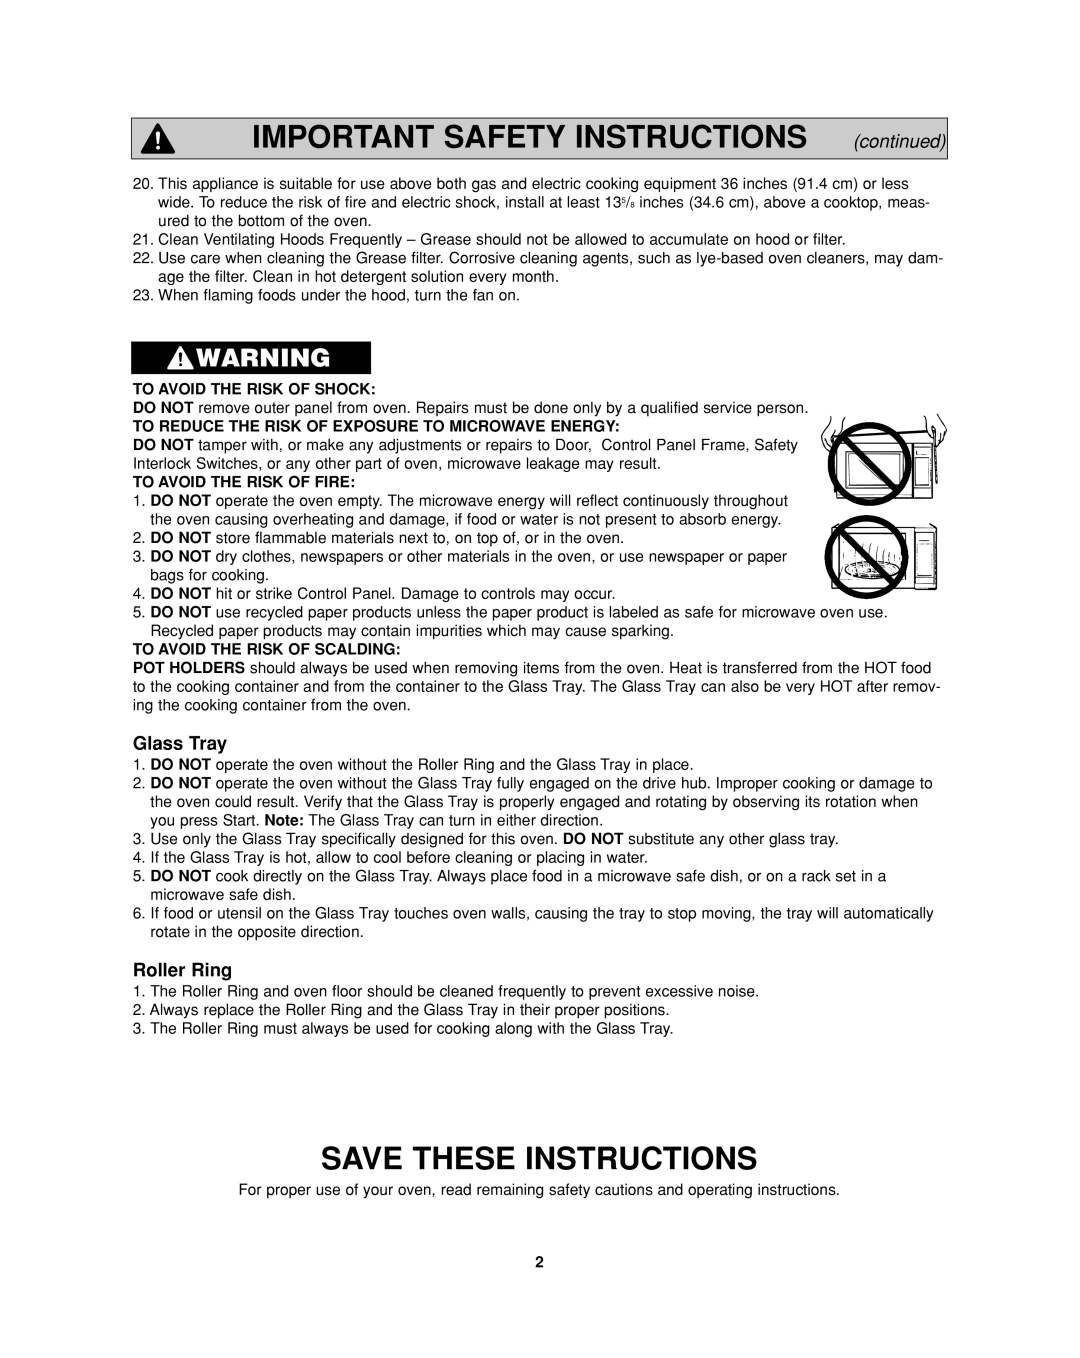 Panasonic NN-SD277 IMPORTANT SAFETY INSTRUCTIONS continued, Save These Instructions, Glass Tray, Roller Ring 